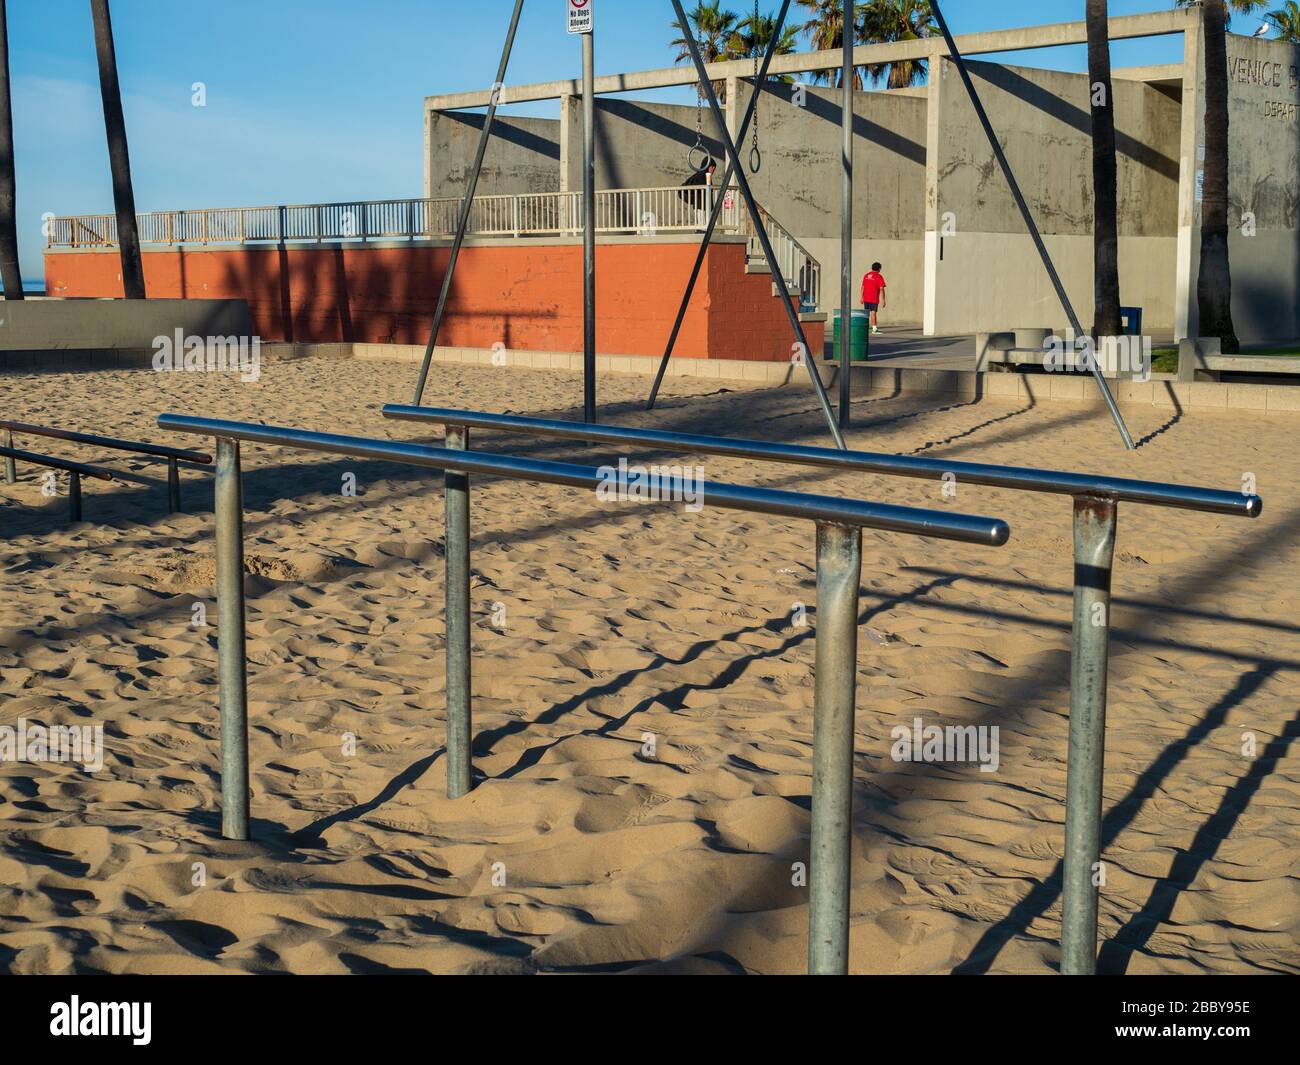 Gymnastics and exercise parallel bars on beach in outdoor gym with men exercising in the back Stock Photo